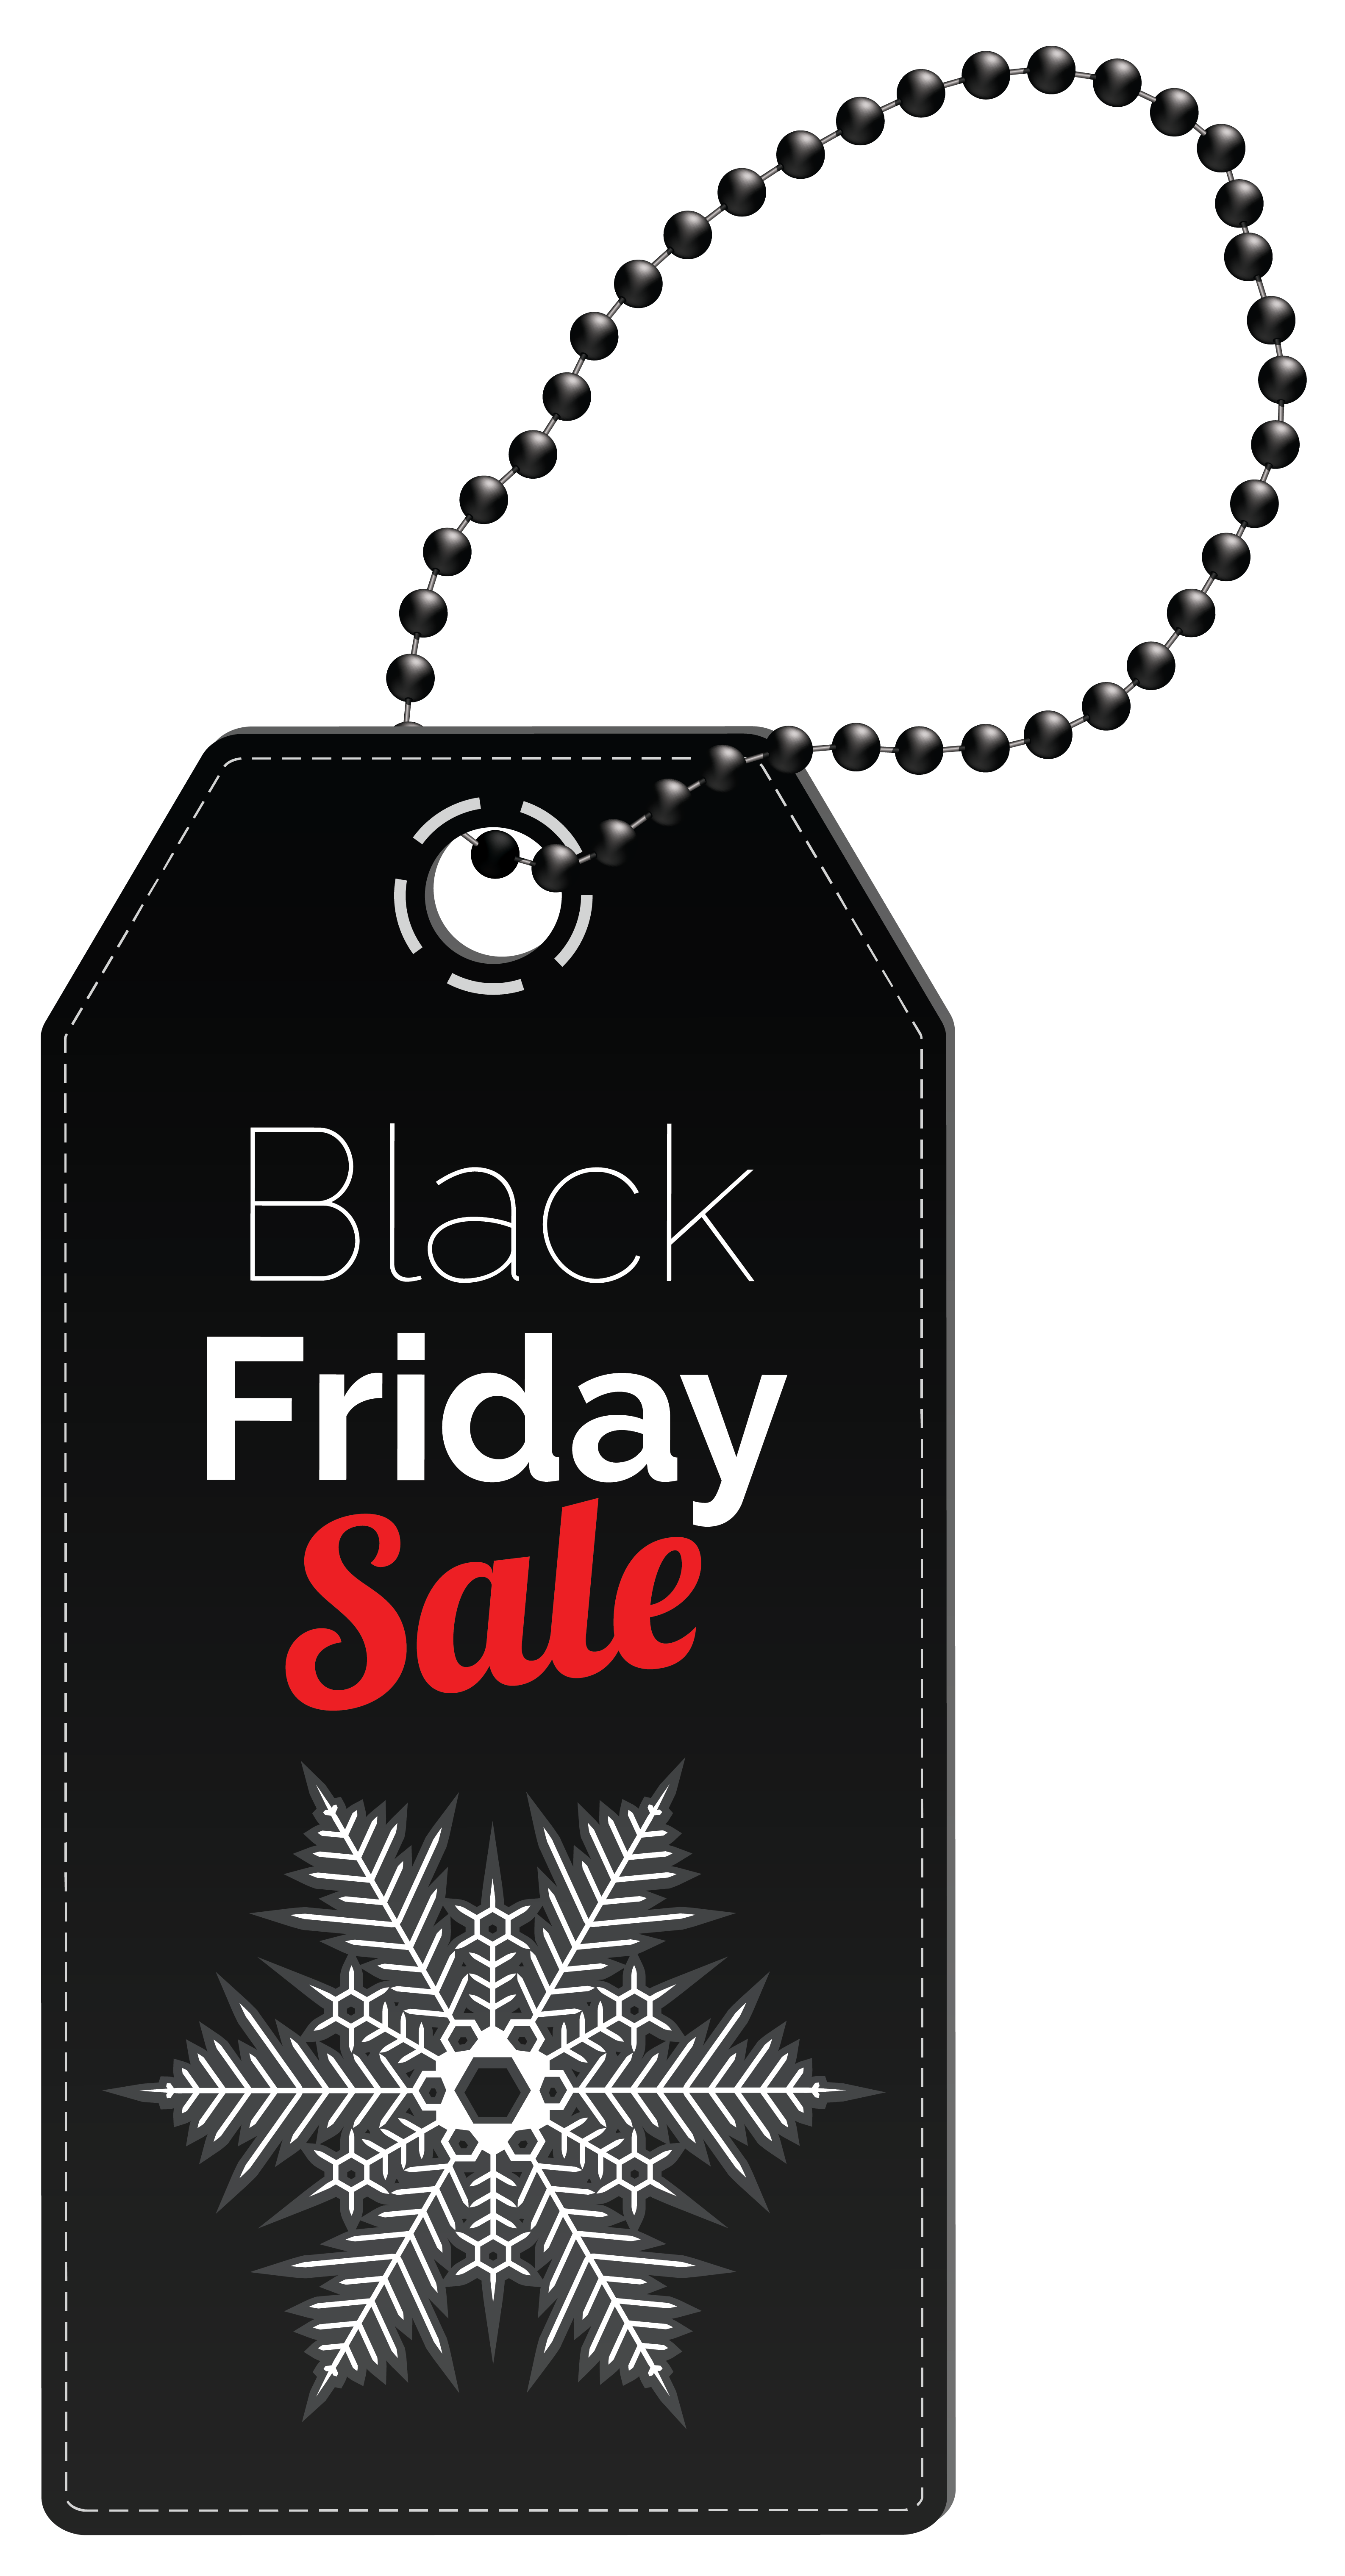 Tag Friday Black Sales Sale PNG File HD Clipart